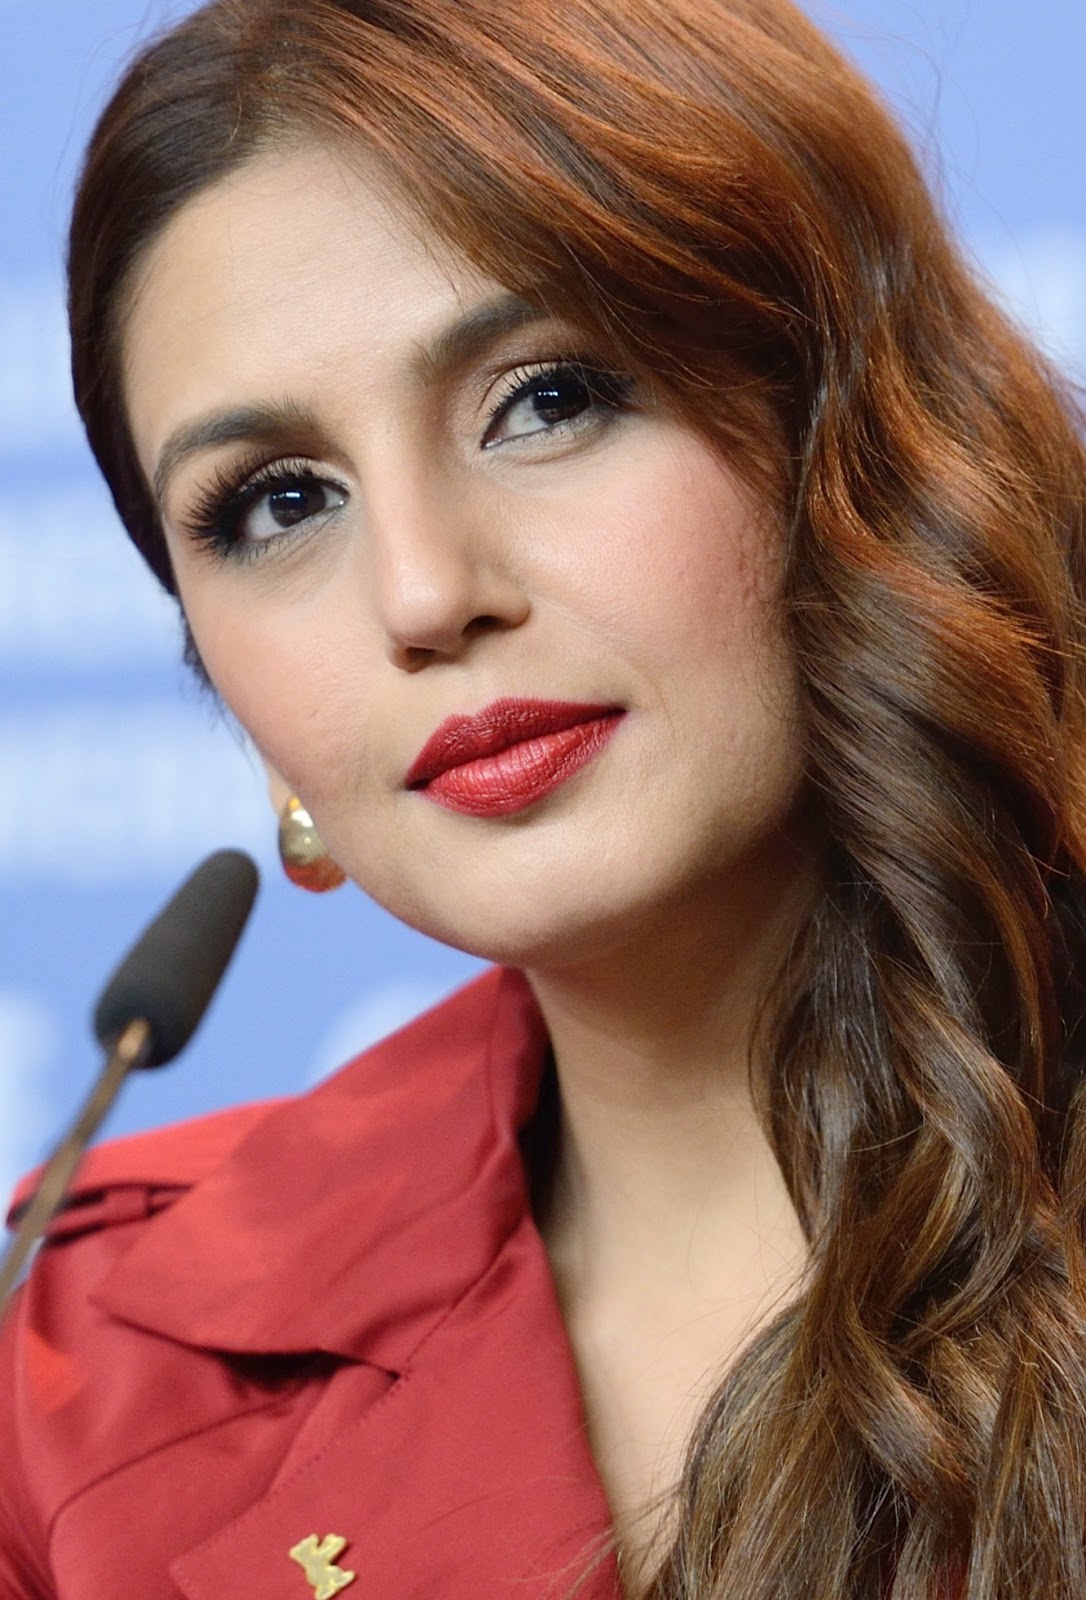 Huma Qureshi Looks Gorgeous As She Attends The 'Viceroy's House' Press Conference During The 67th Berlinale International Film Festival in Berlin, Germany